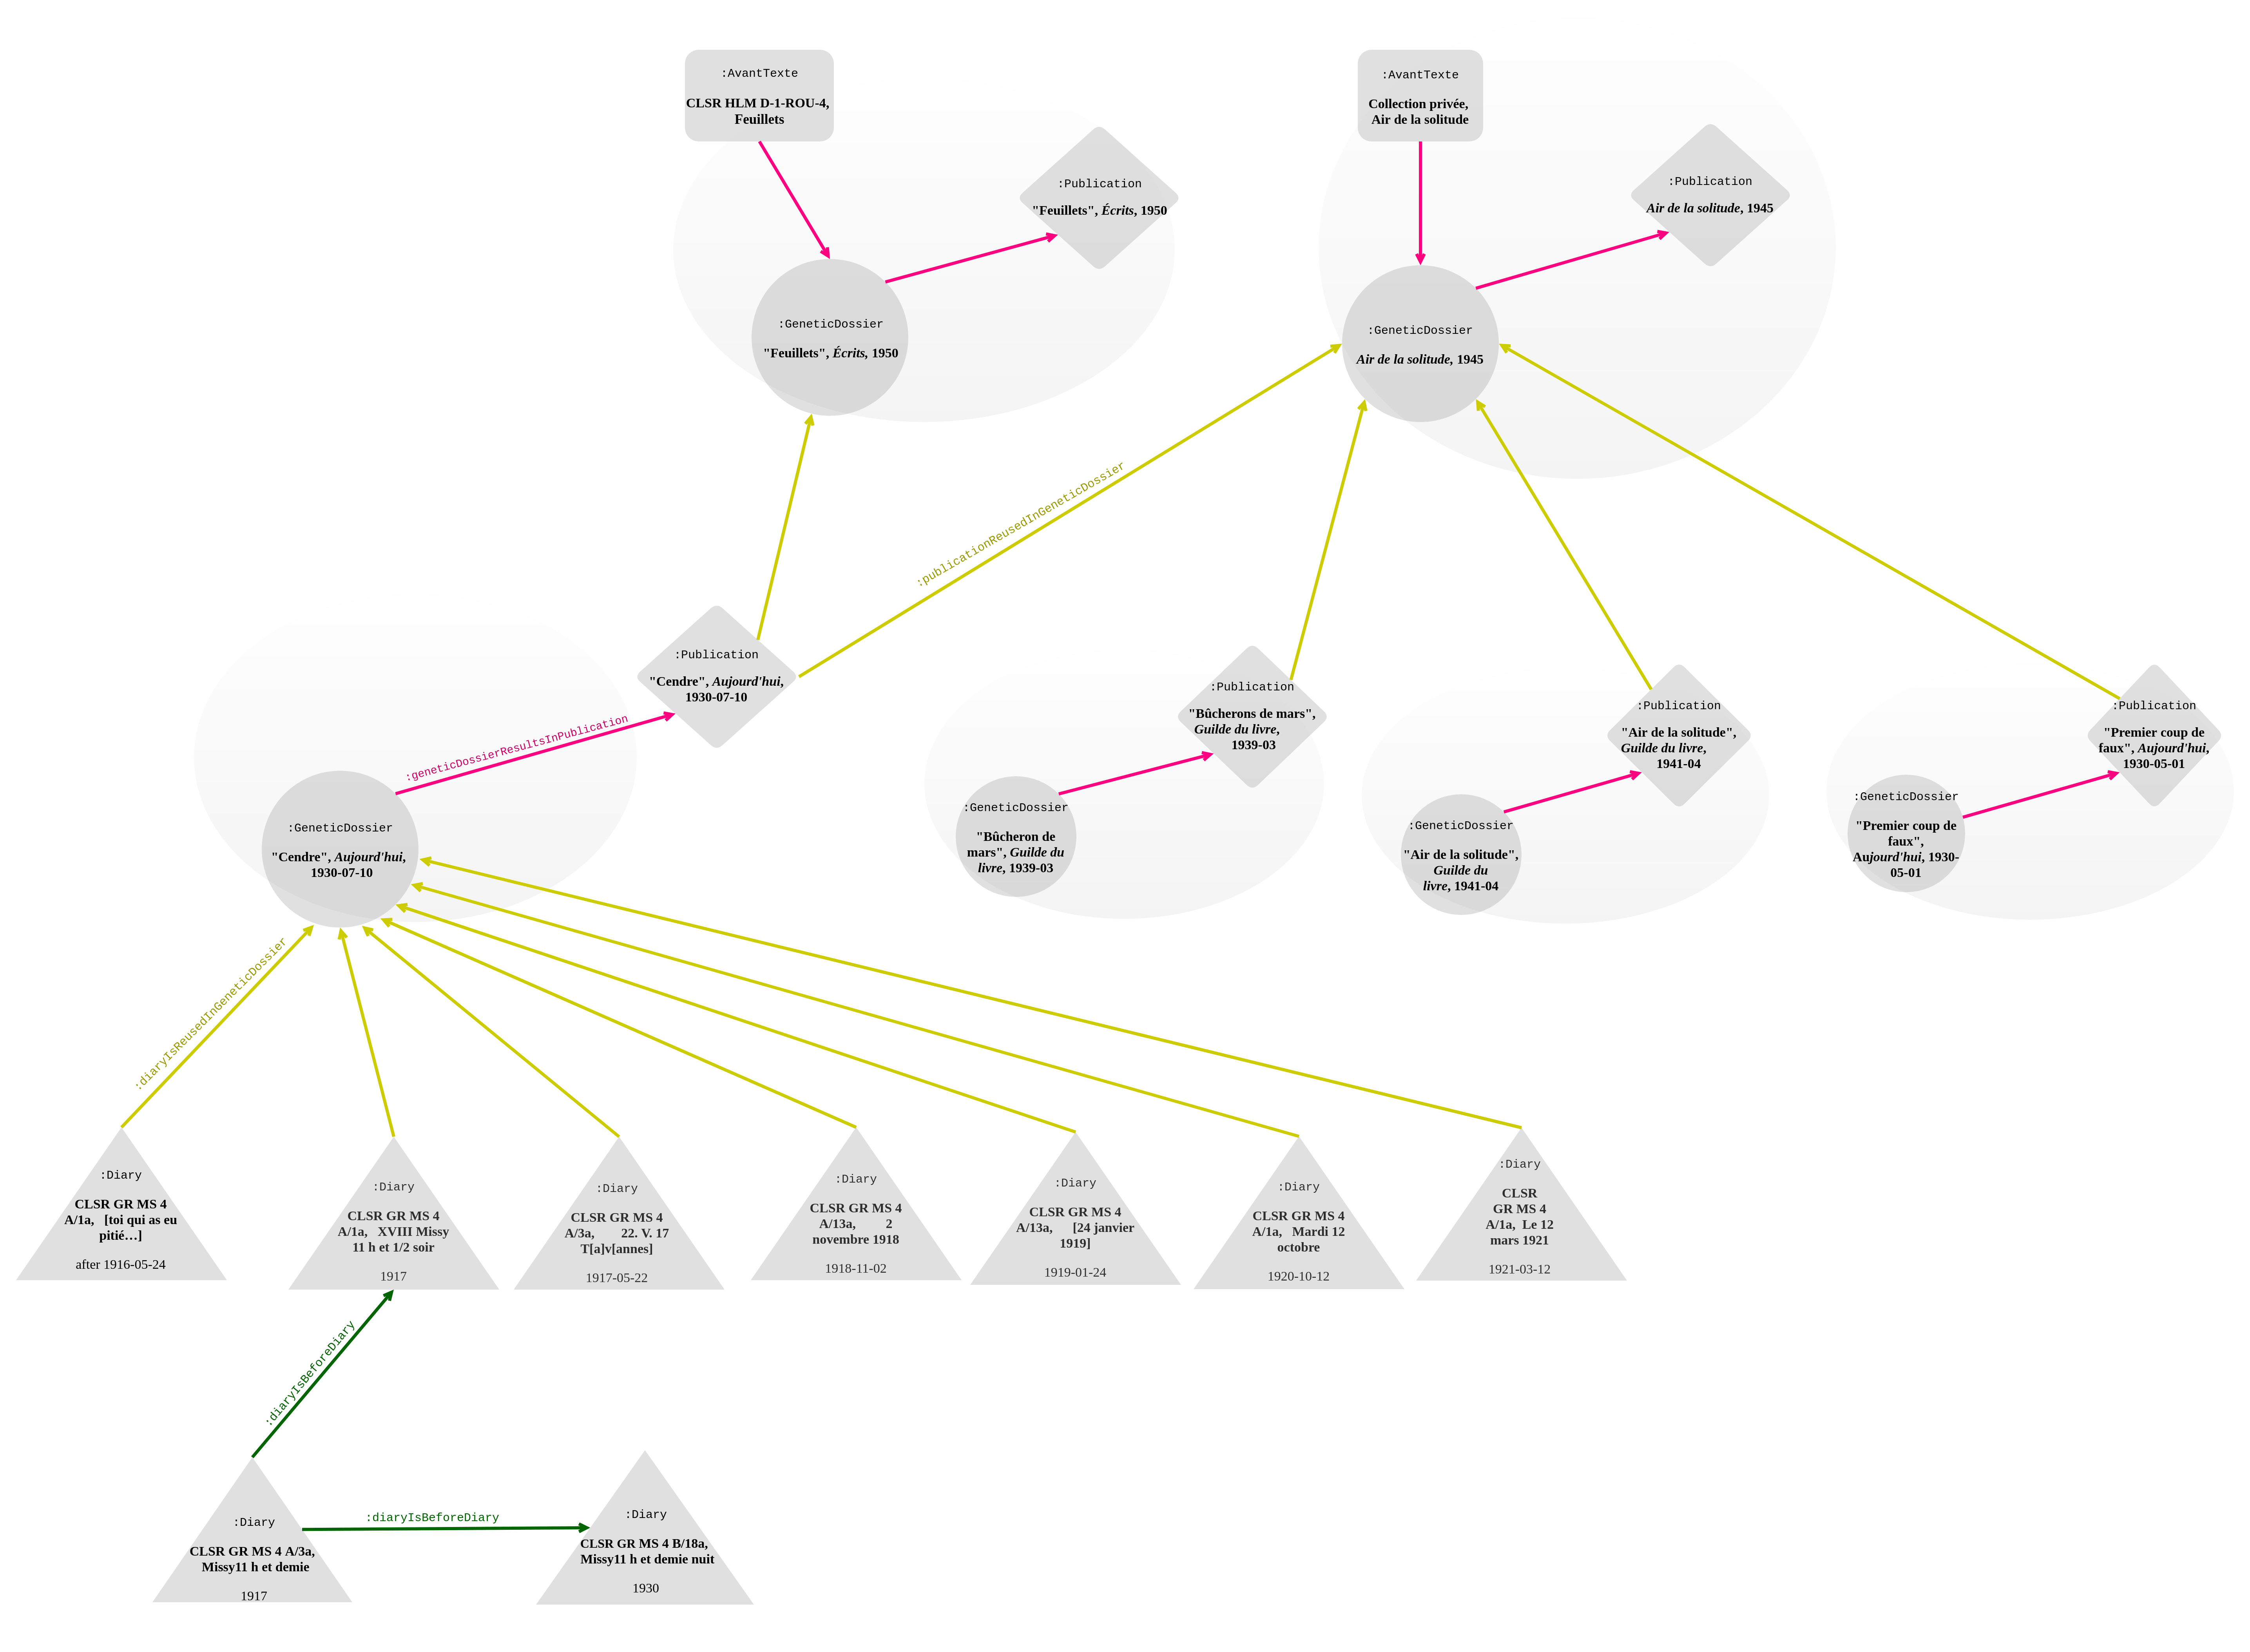 Genetic network of "Cendre", Aujourd'hui, 10 July 1930 (§1-§7), including its reuse in Feuillets and Air de la solitude (§16-19). Links to (:avantTextIsPartOfGeneticDossier) and from the genetic dossier are in pink; the diary rewriting in green; sub-properties of :isReusedIn in yellow. The labels are not repeated on all of the edges. The date is displayed for each diary entry to maintain chronological order.